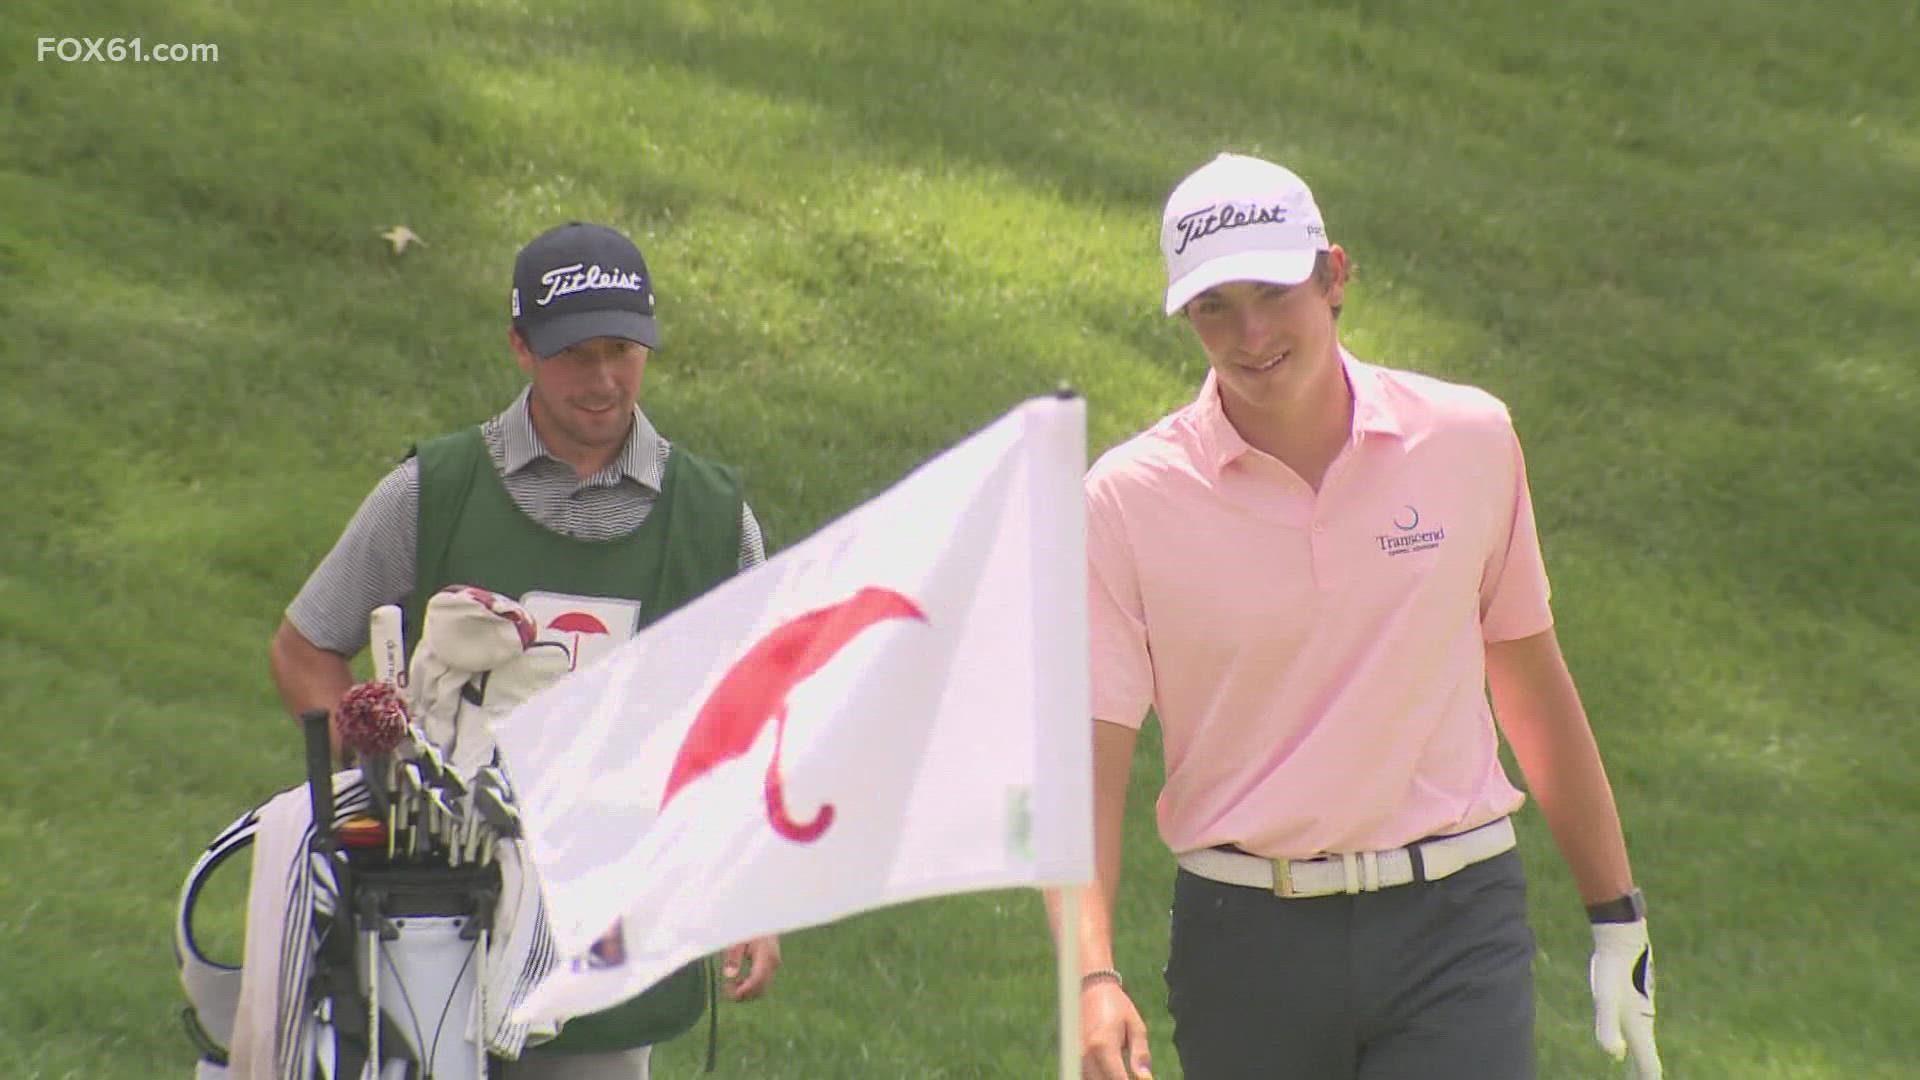 The 19-year-old Milford native, Ben James, just graduated high school, and is now teeing off with the pros.